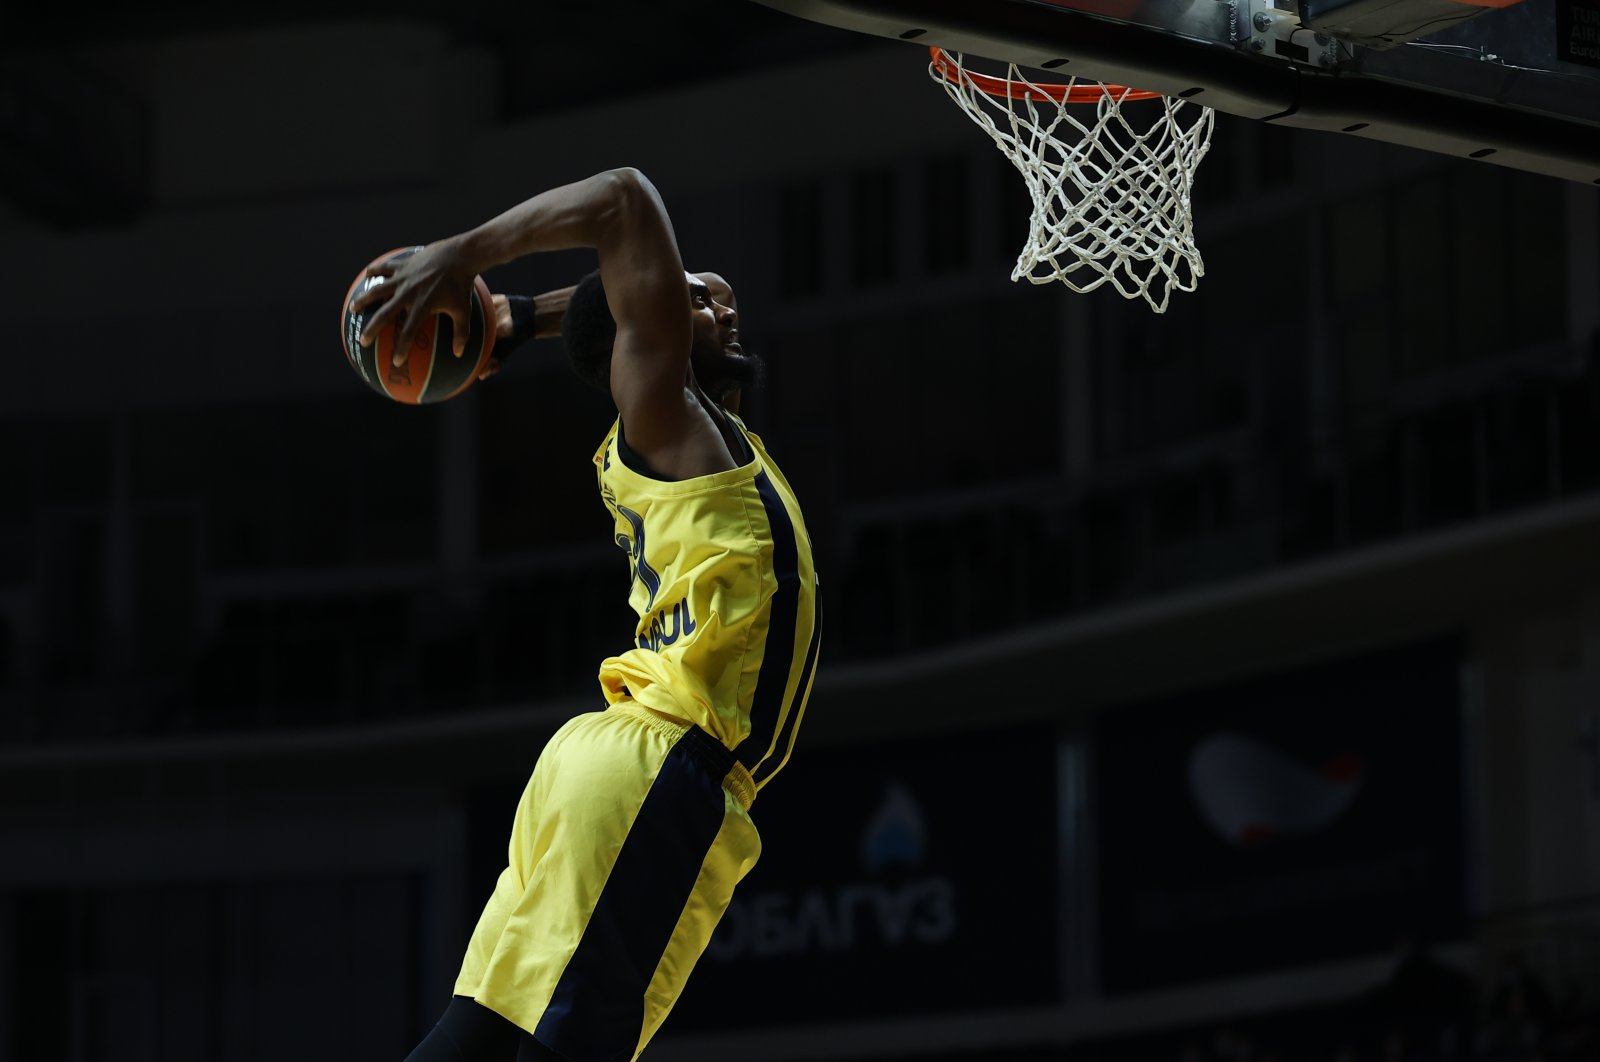 Fenerbahçe Beko's Dyshawn Pierre jumps for a slam dunk at Moscow's Mytishchi Arena, Russia on Jan. 28, 2021 (AA Photo)